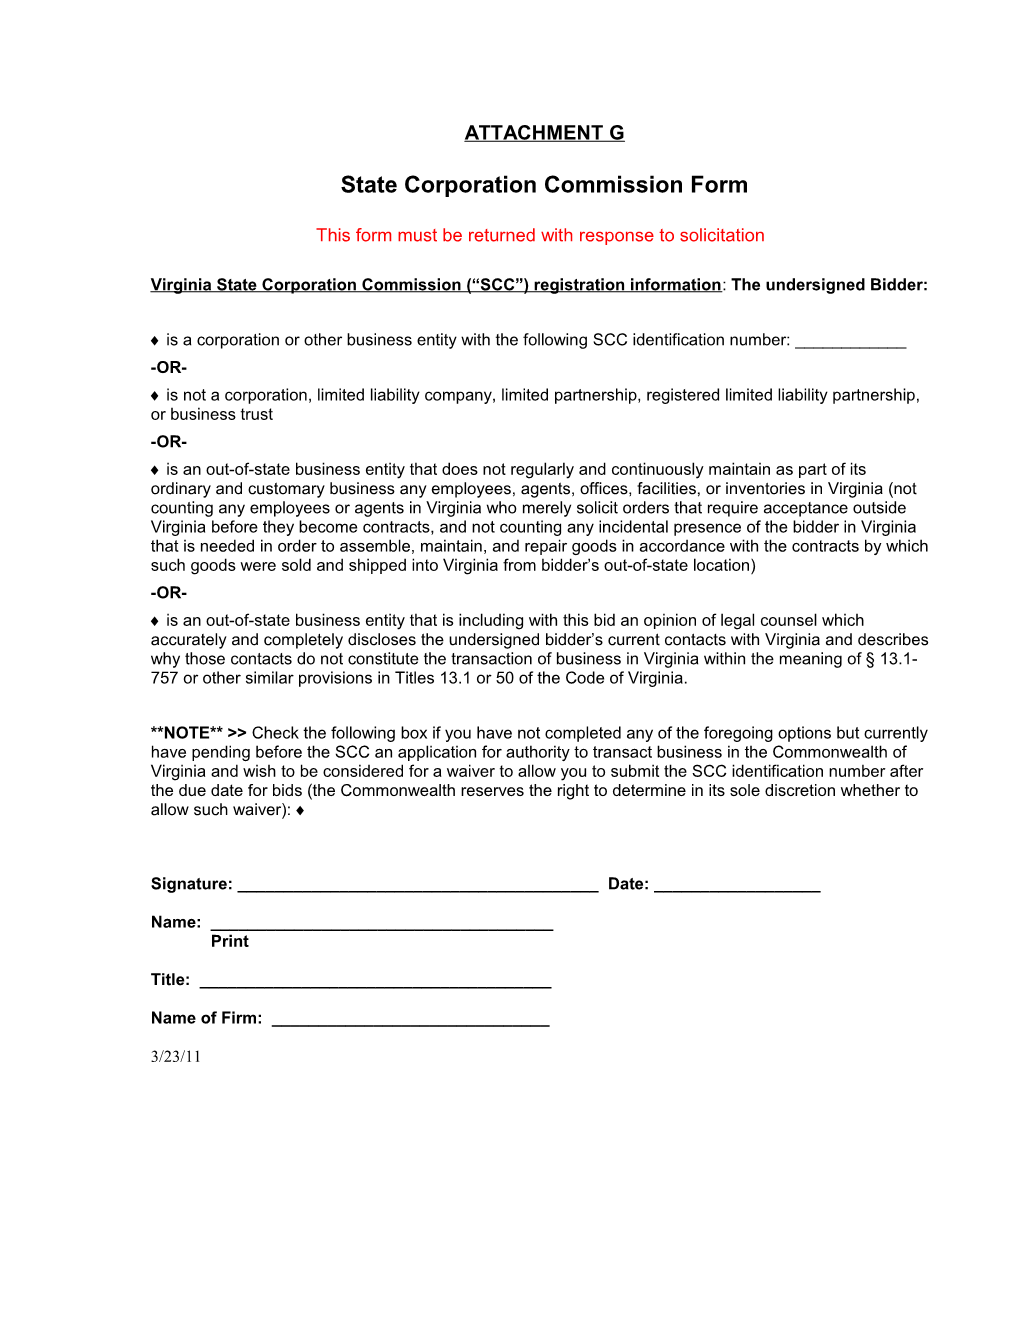 State Corporation Commission Form